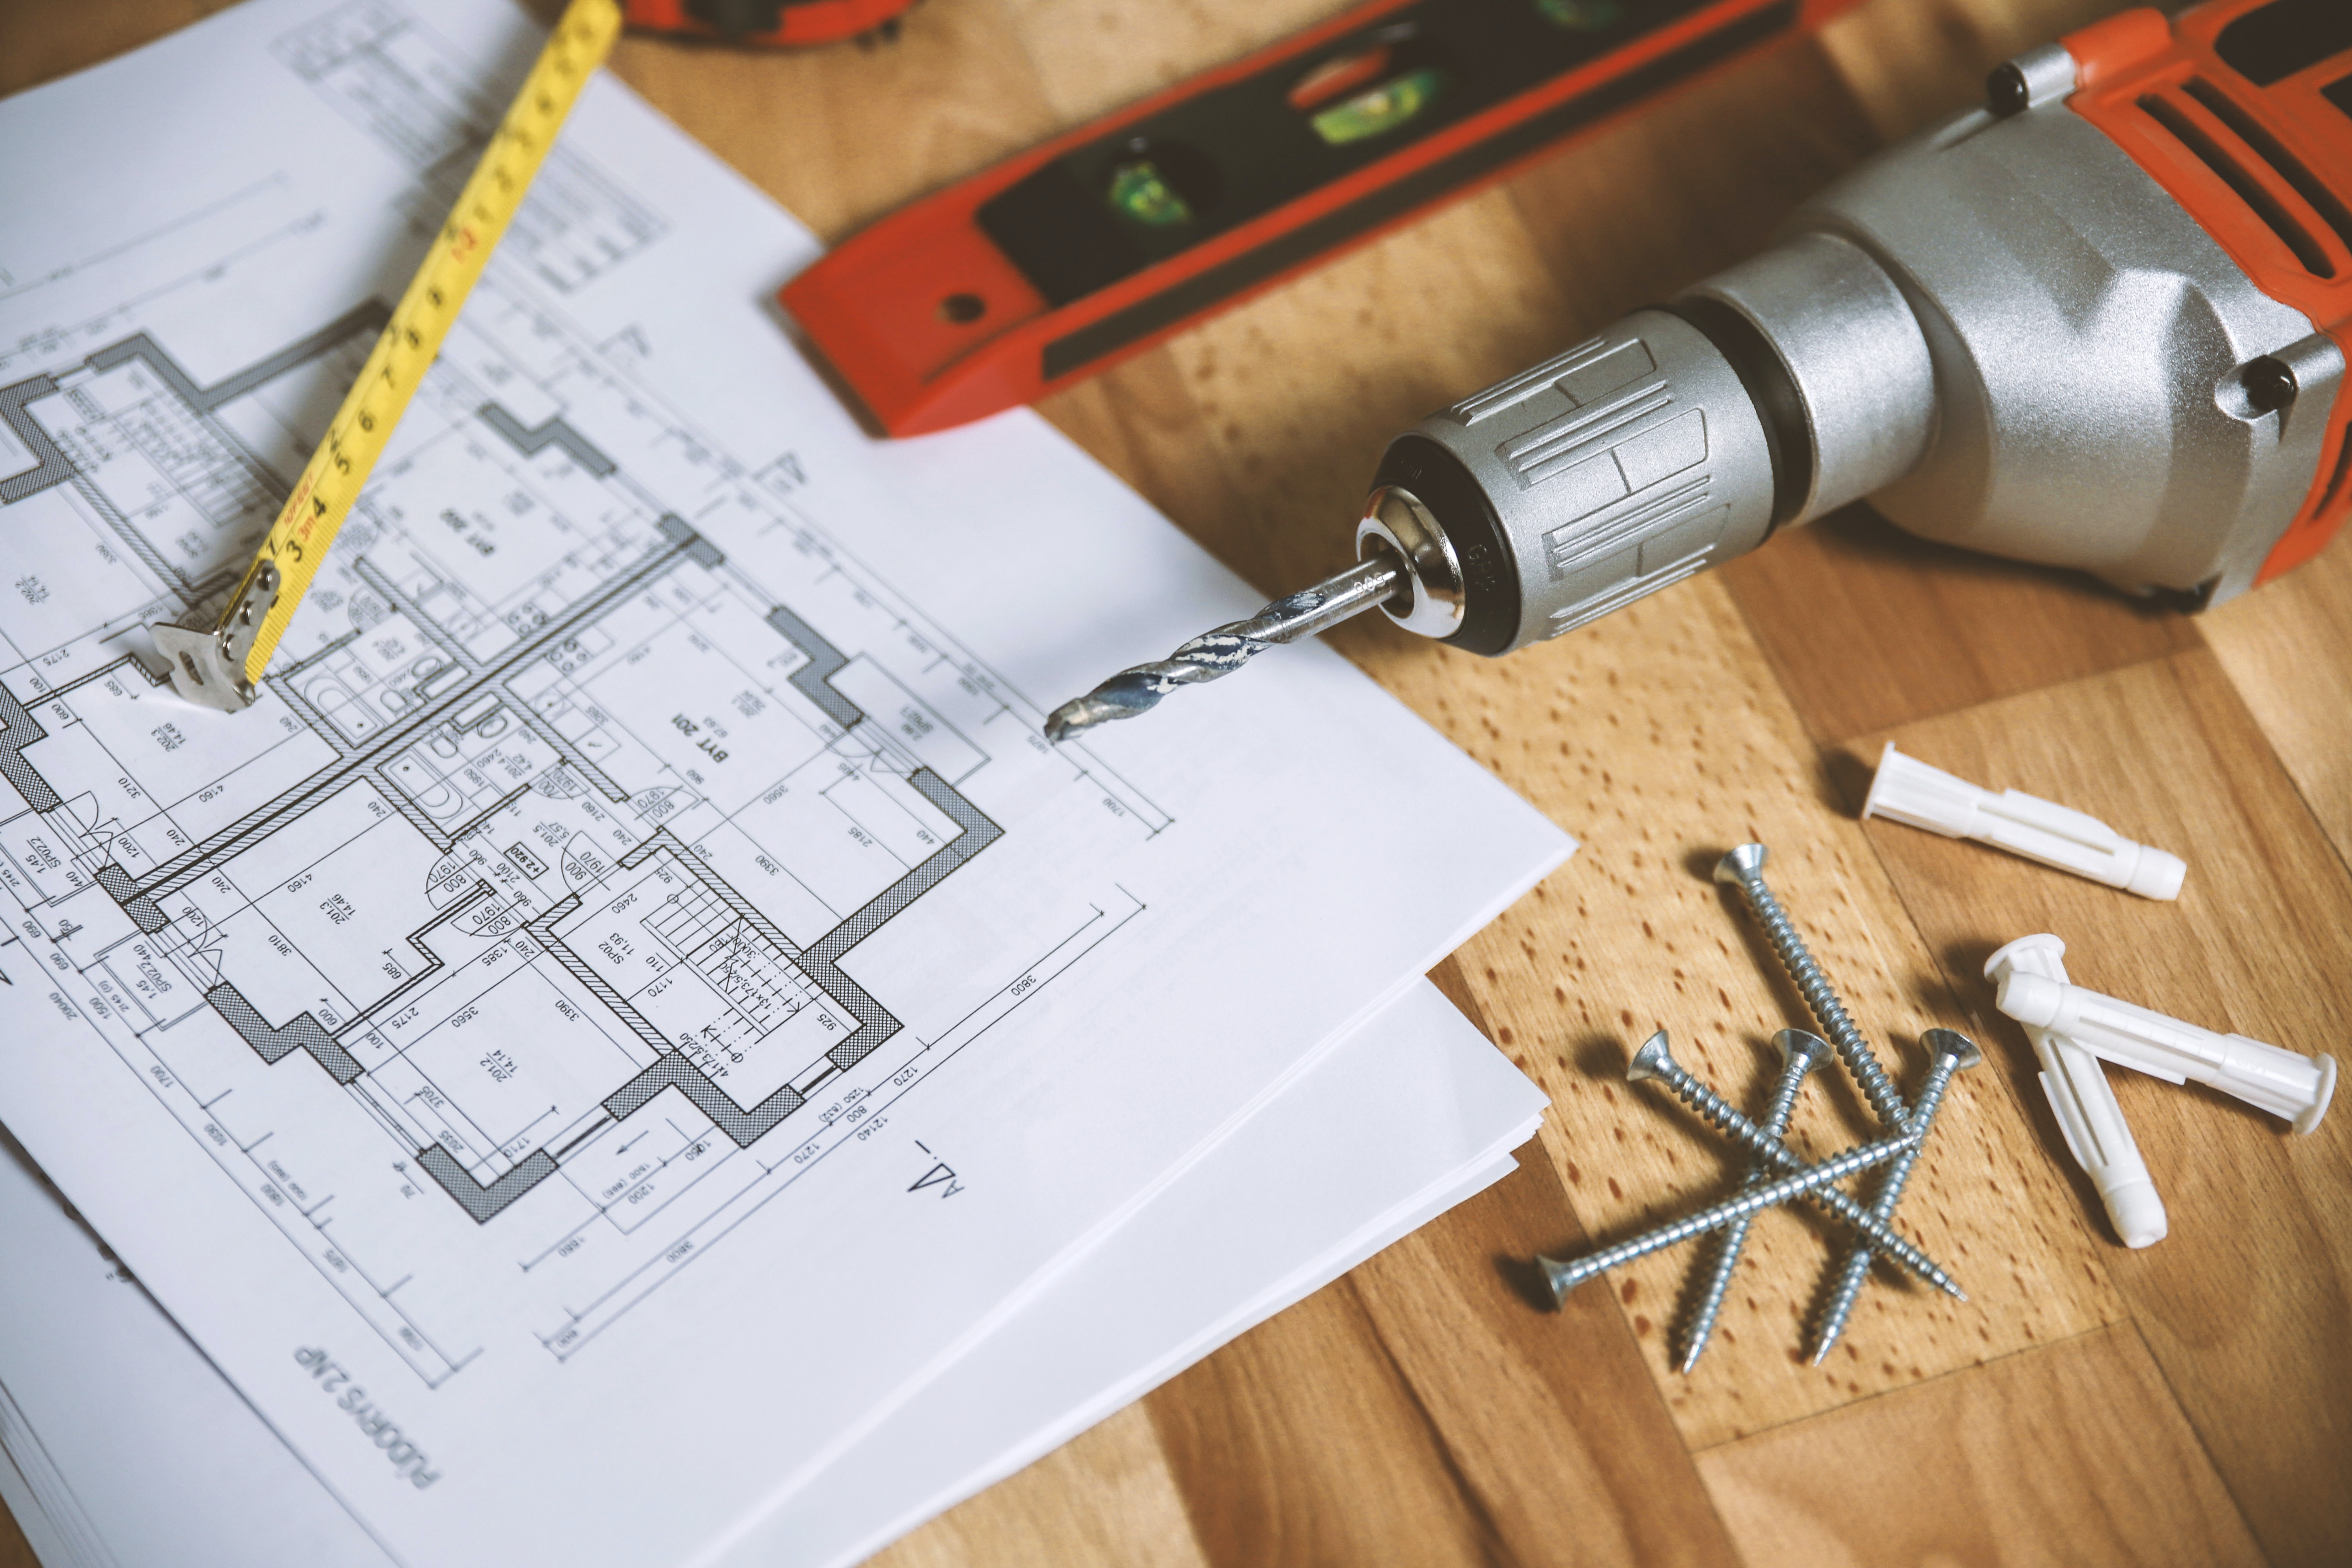 Free stock photo showing home install instructions, drill, measuring tools, screws